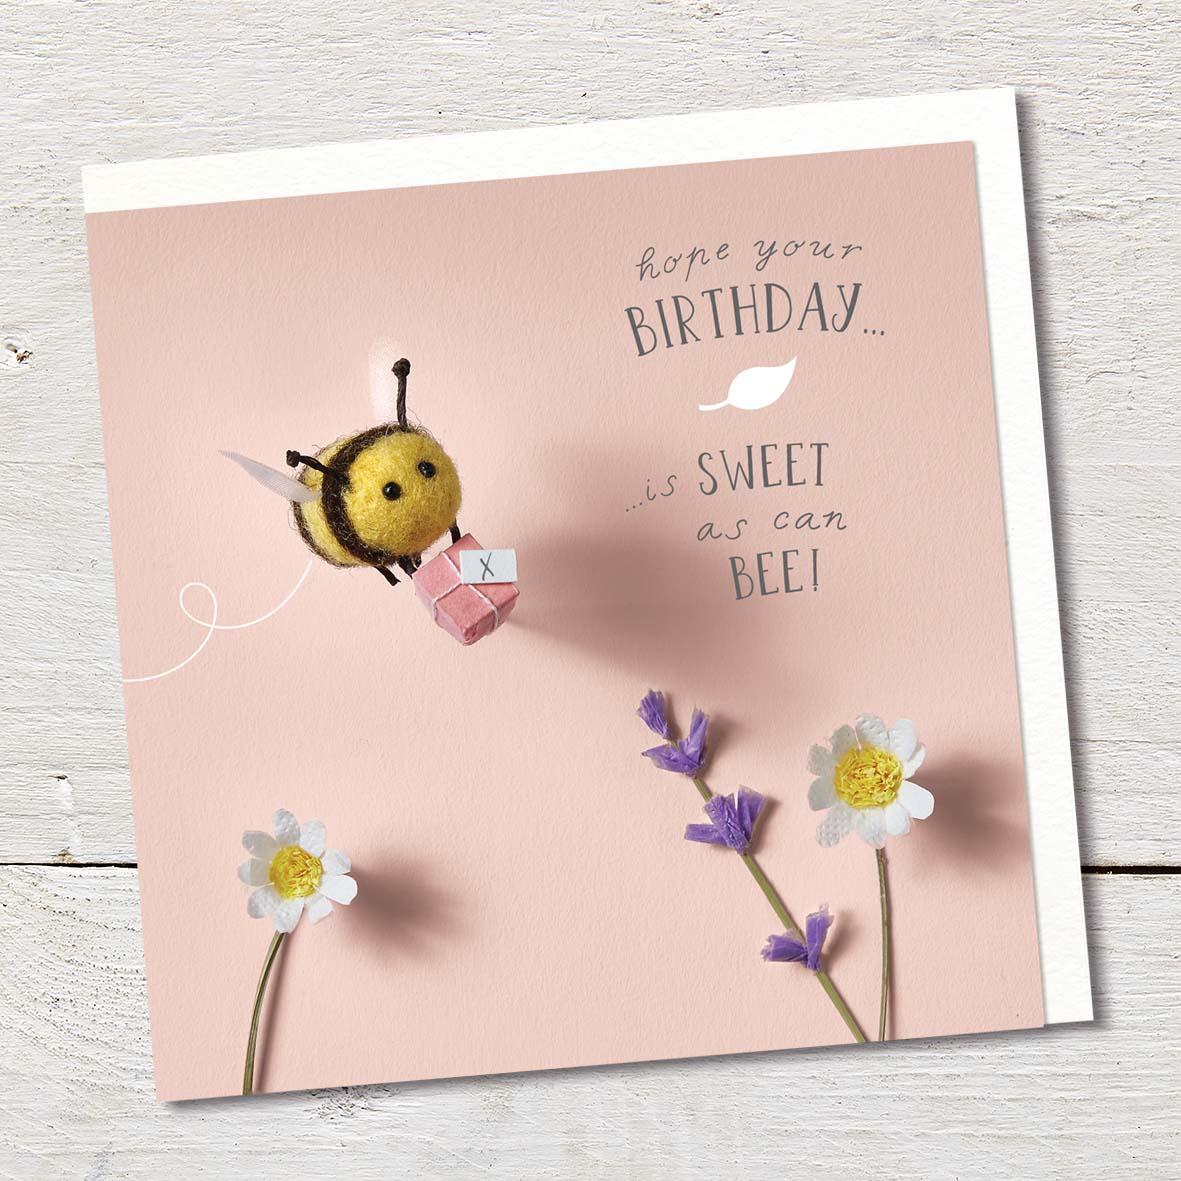 Card featuring flowers and a cute felted bumble bee carrying a tiny present.